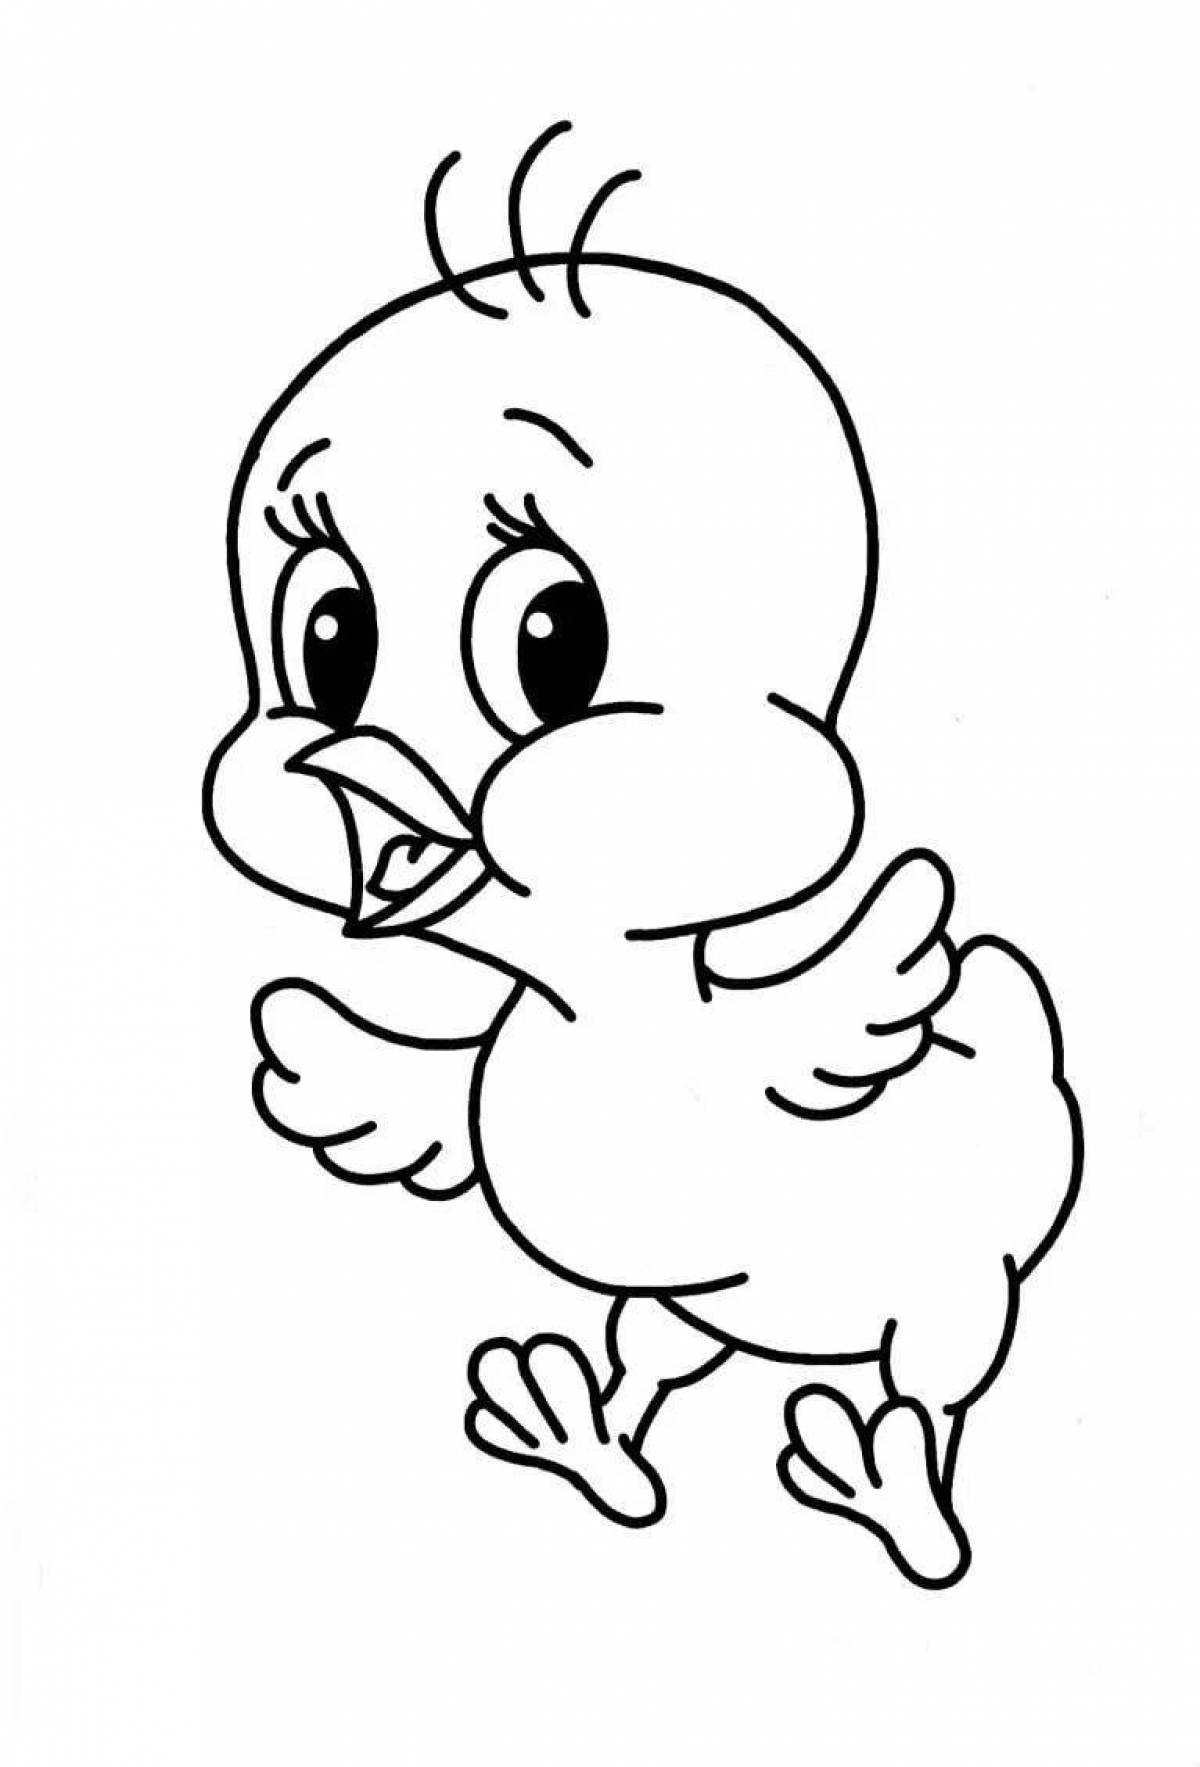 Adorable chick coloring page for kids